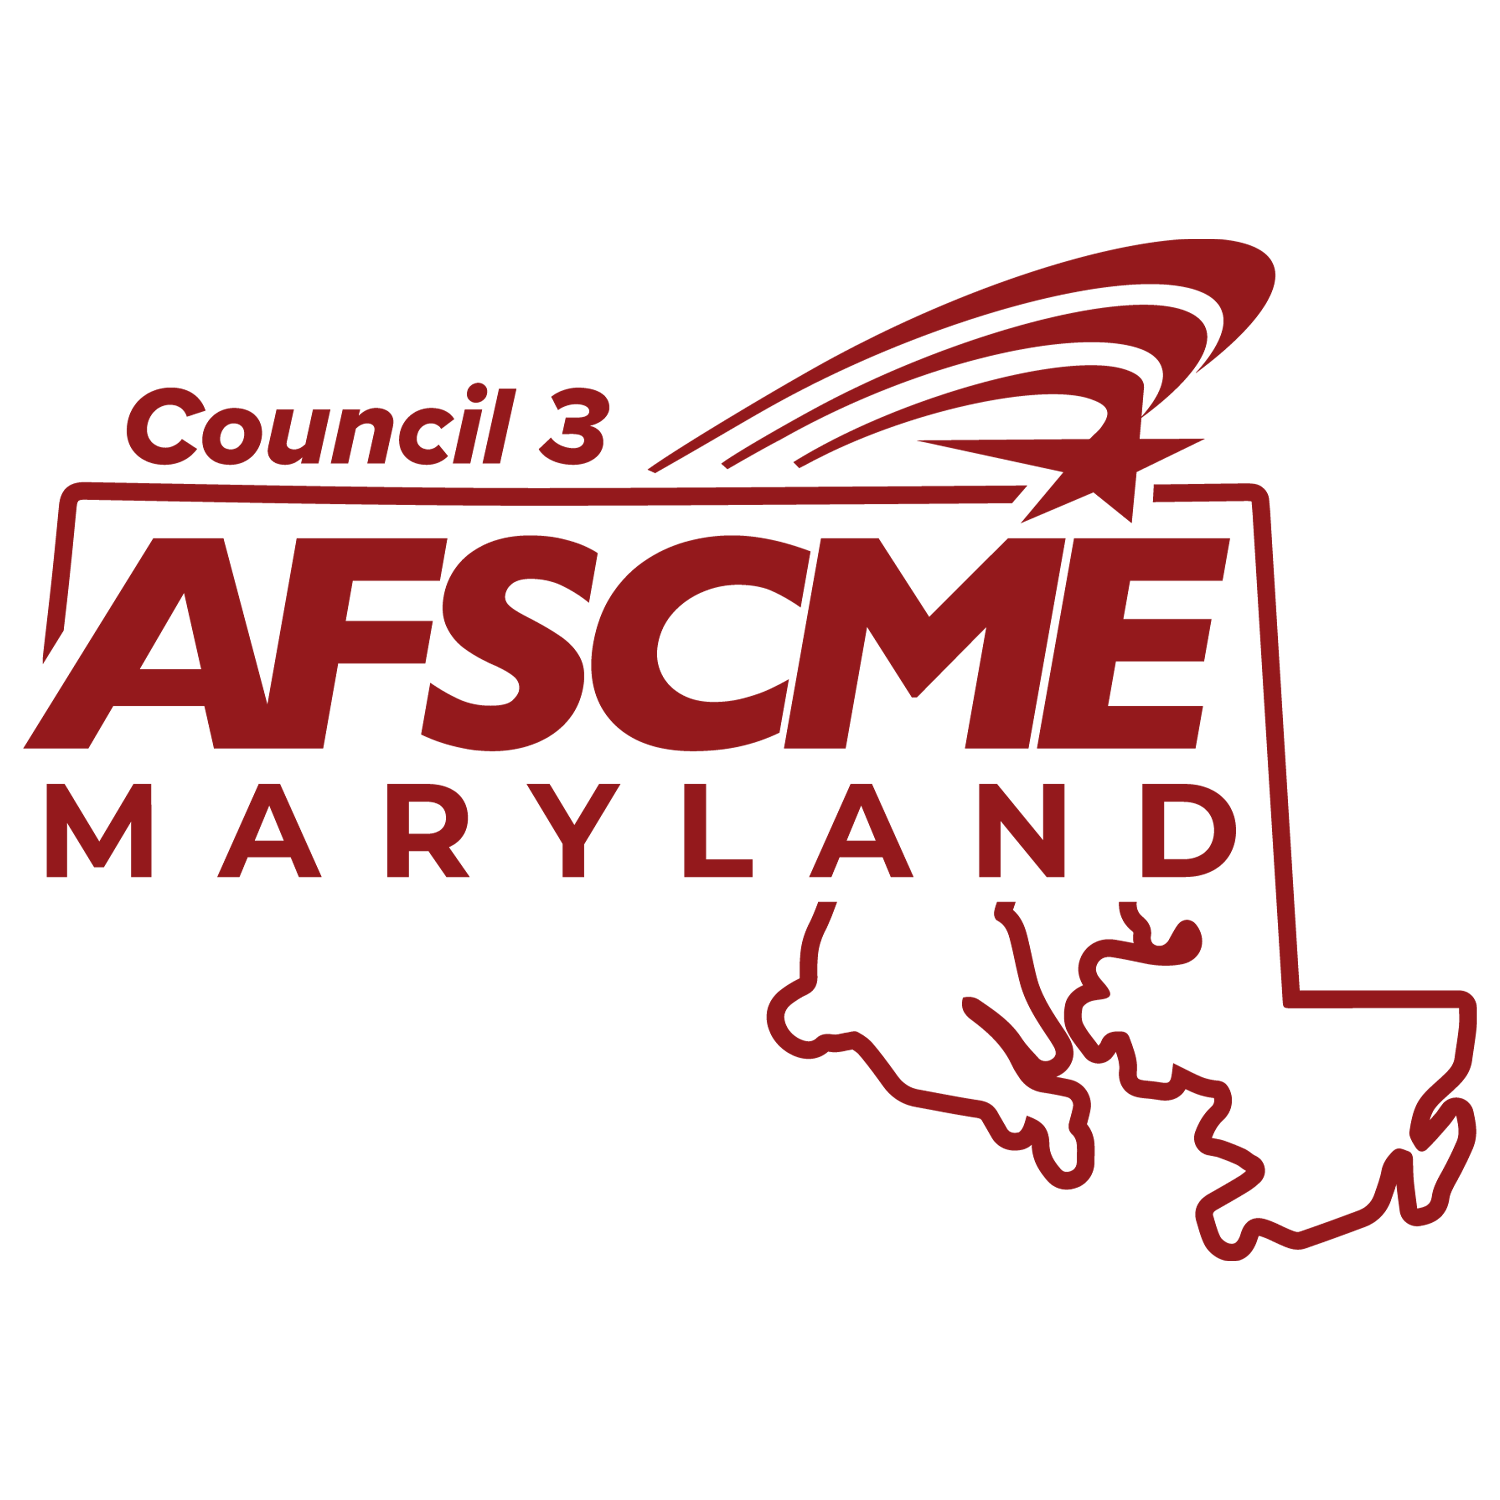 Afscme Maryland Council 3